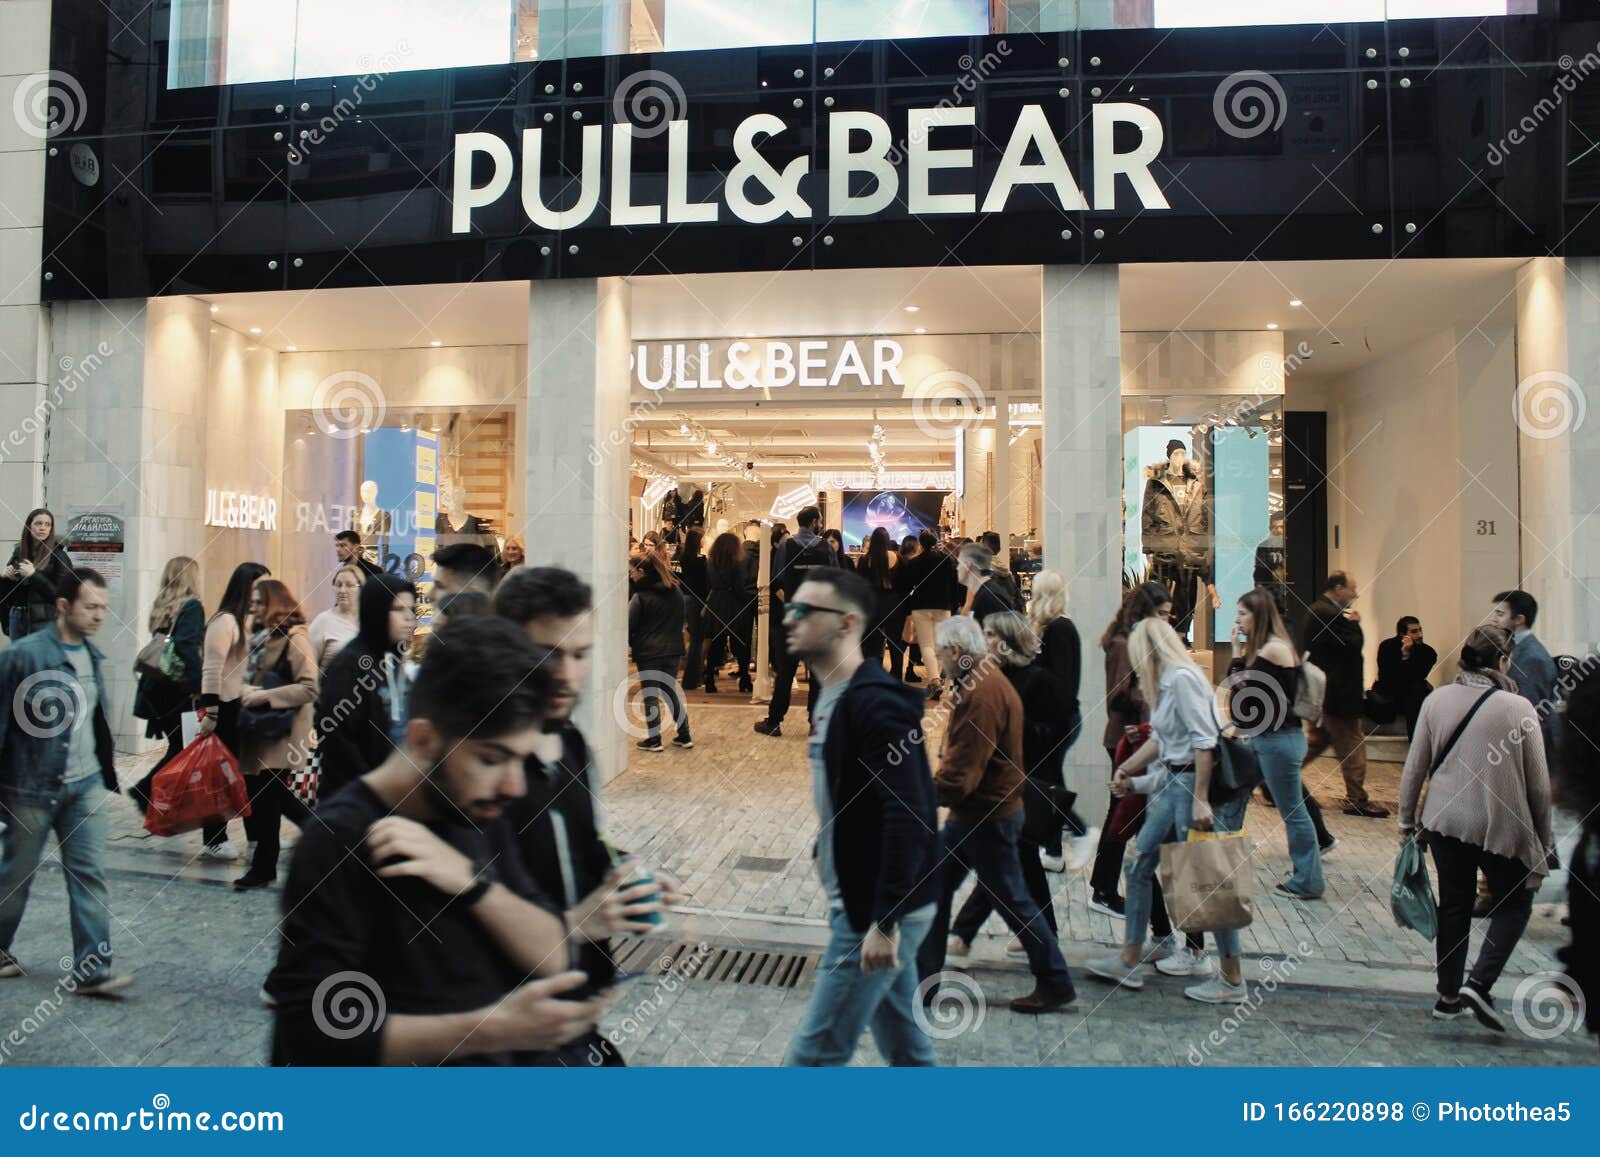 Pull and Bear Store in Athens, Greece Editorial Stock Photo - Image of friday, 166220898